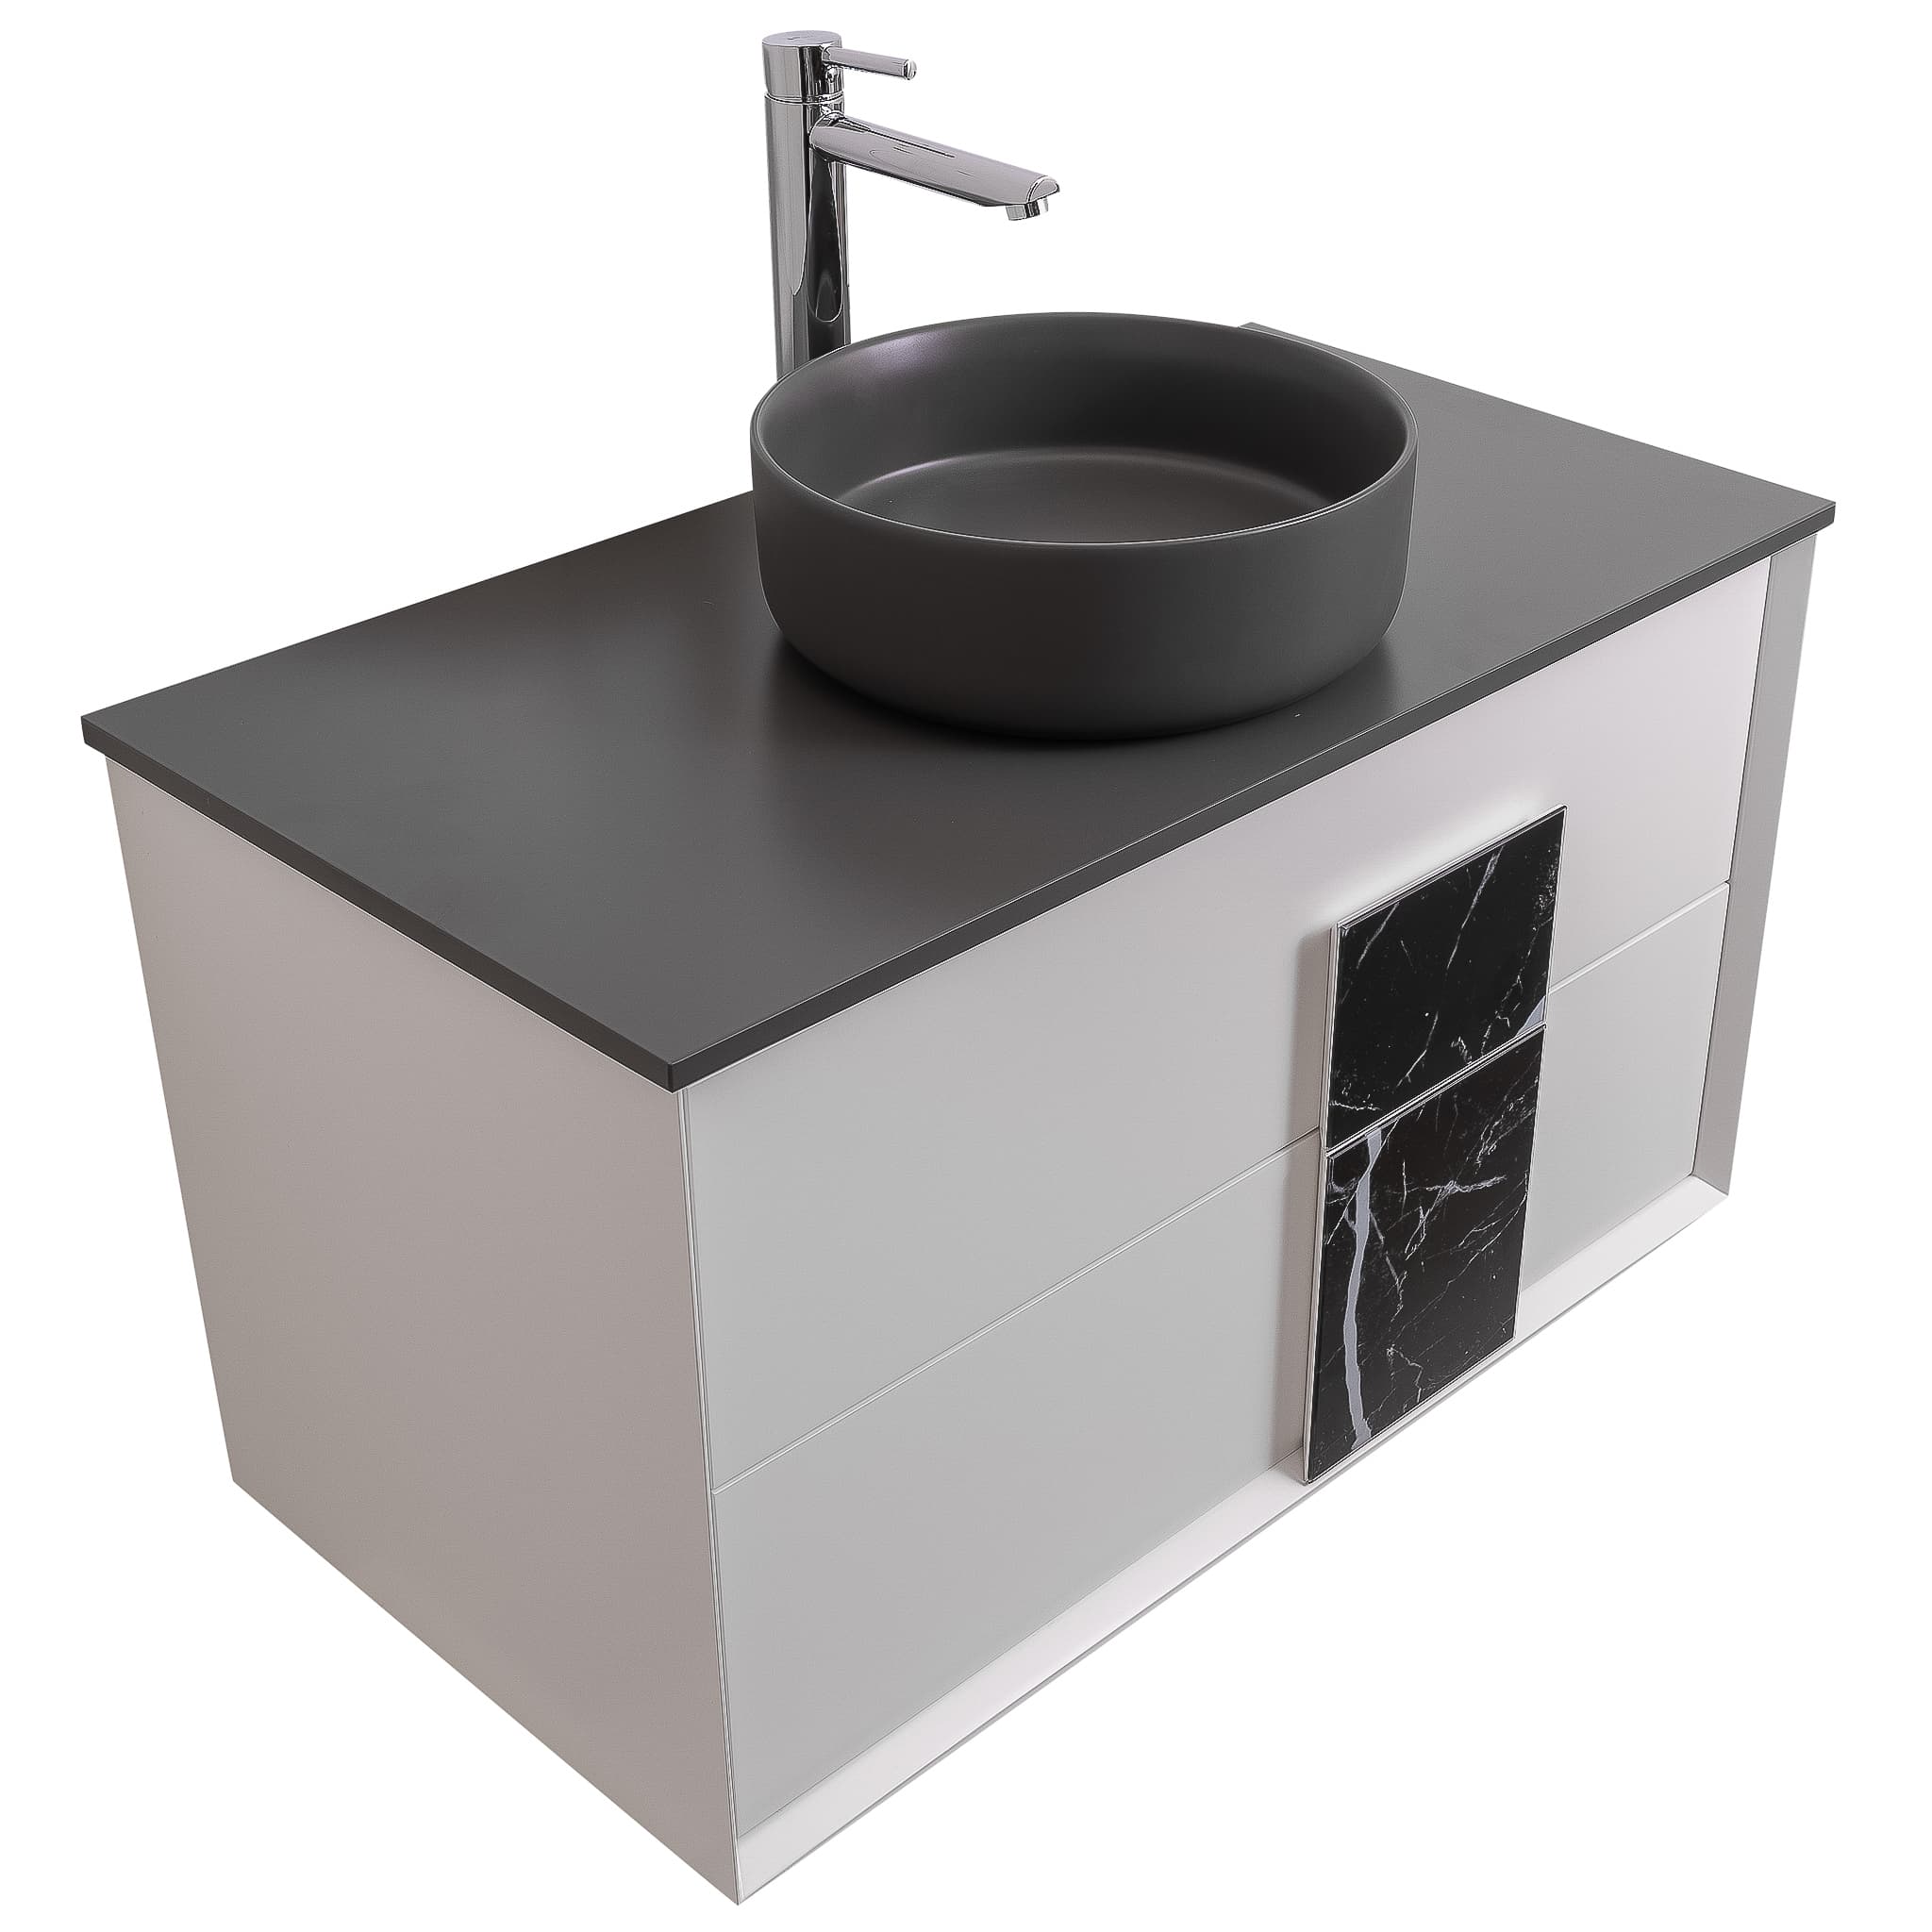 Piazza 31.5 Matte White With Black Marble Handle Cabinet, Ares Grey Ceniza Top and Ares Grey Ceniza Ceramic Basin, Wall Mounted Modern Vanity Set